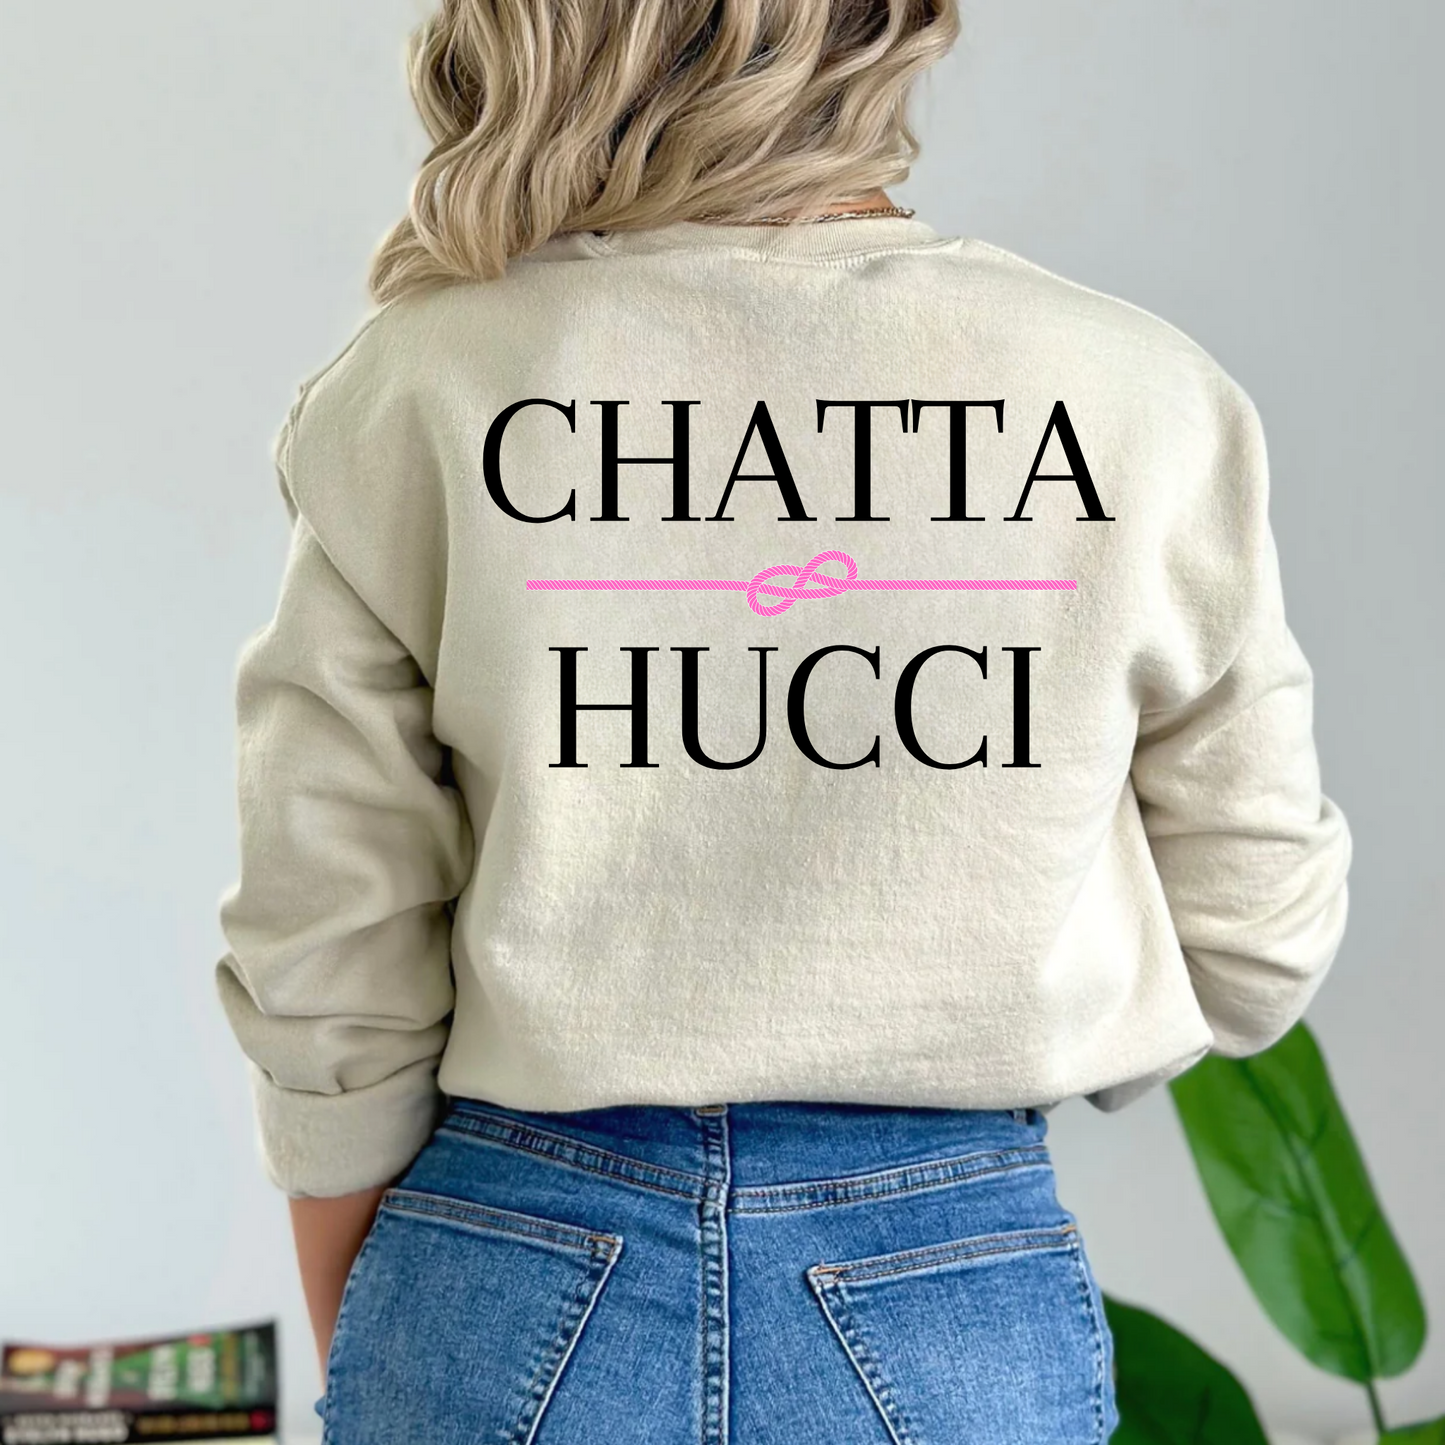 (shirt not included) CHATTA HUCCI - Clear Film Transfer